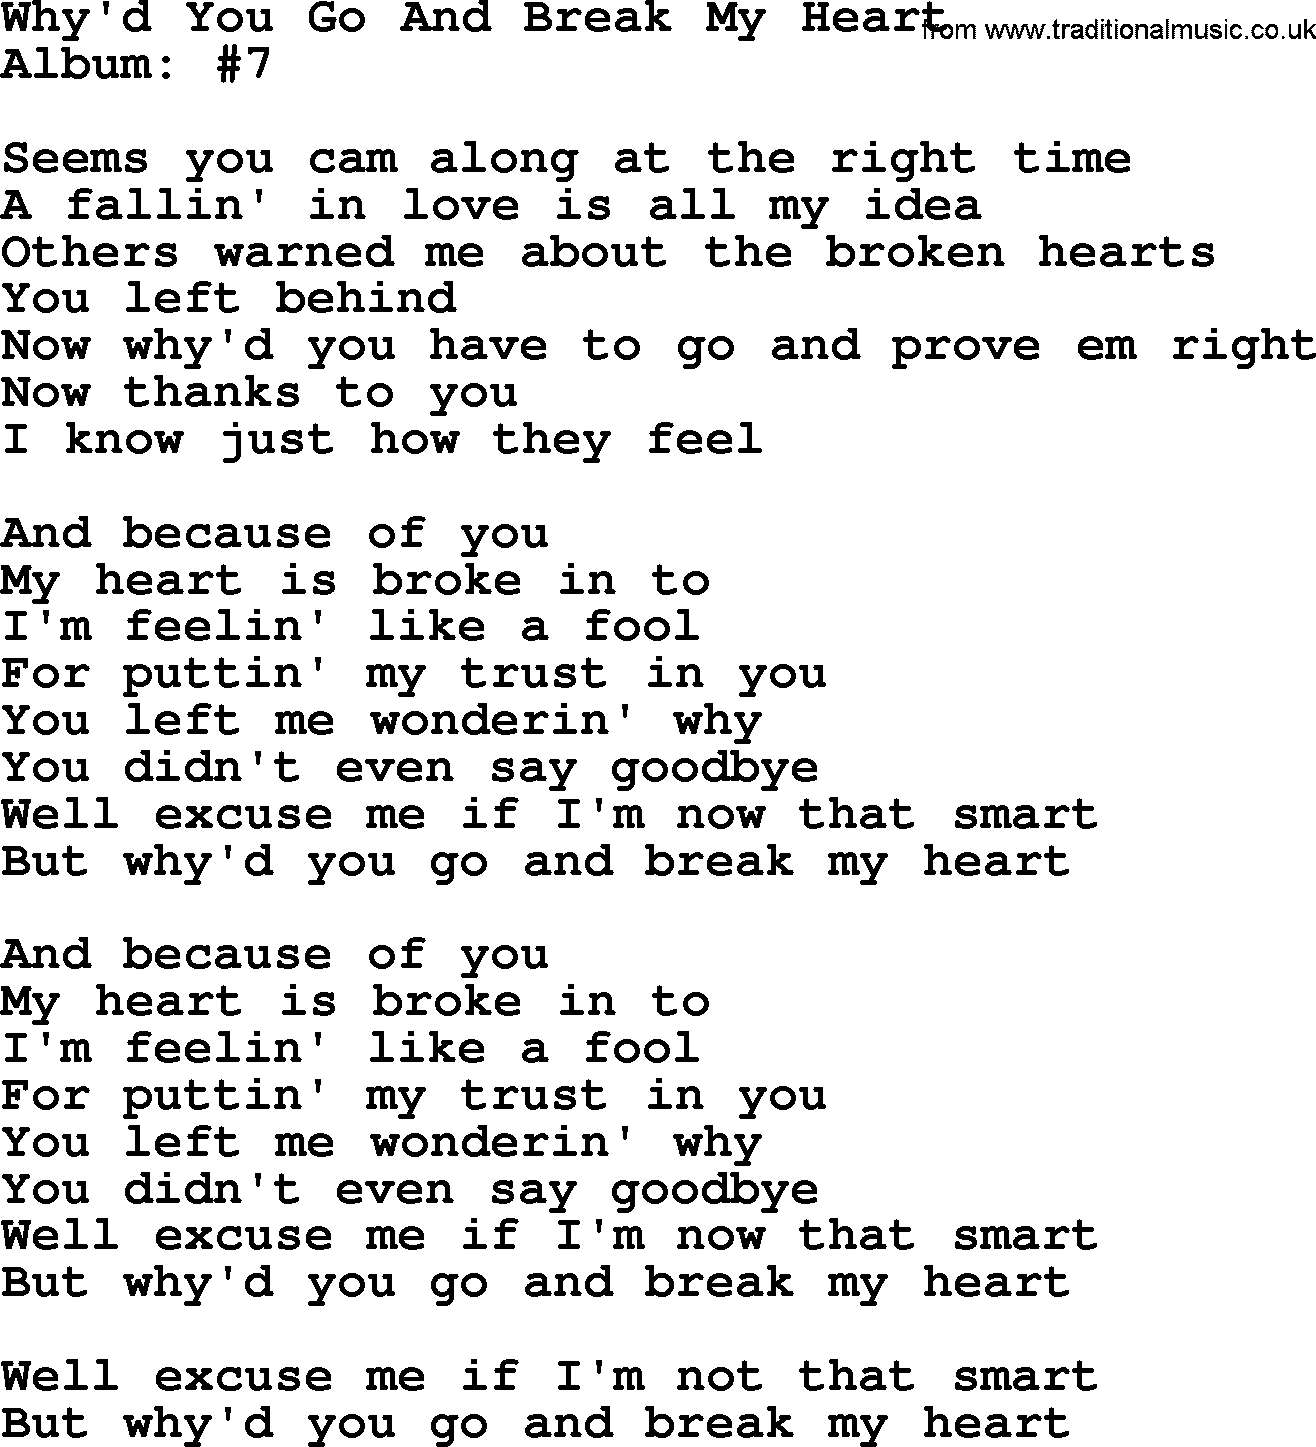 George Strait song: Why'd You Go And Break My Heart, lyrics